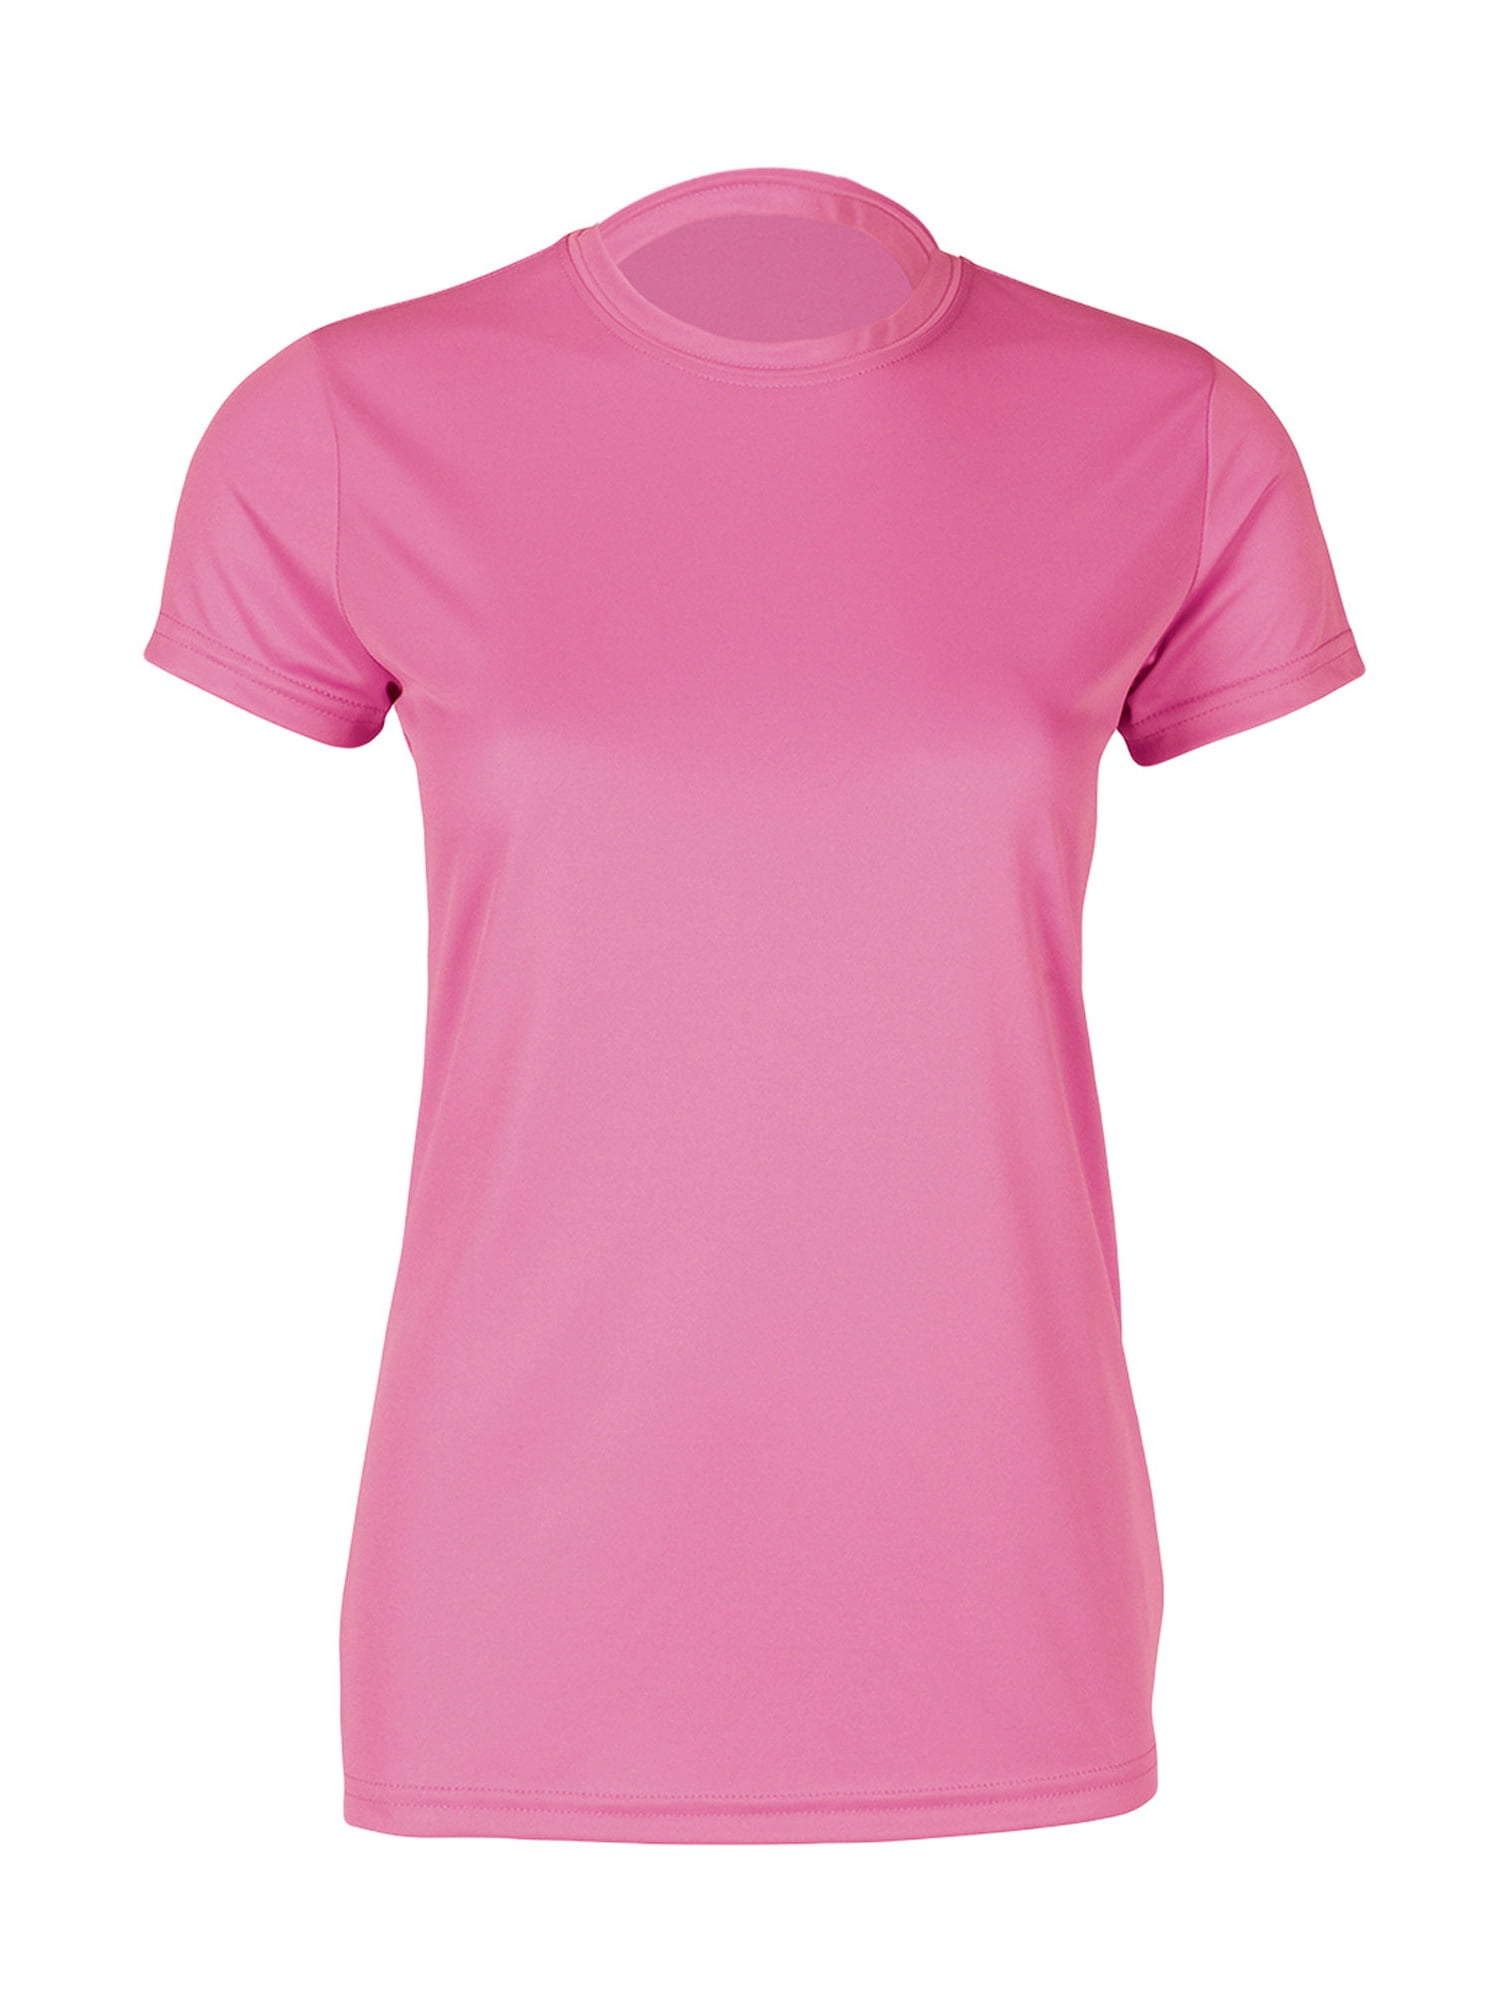 Paragon Women's Wrinkle Resistant Performance T-Shirt, Style 204 ...